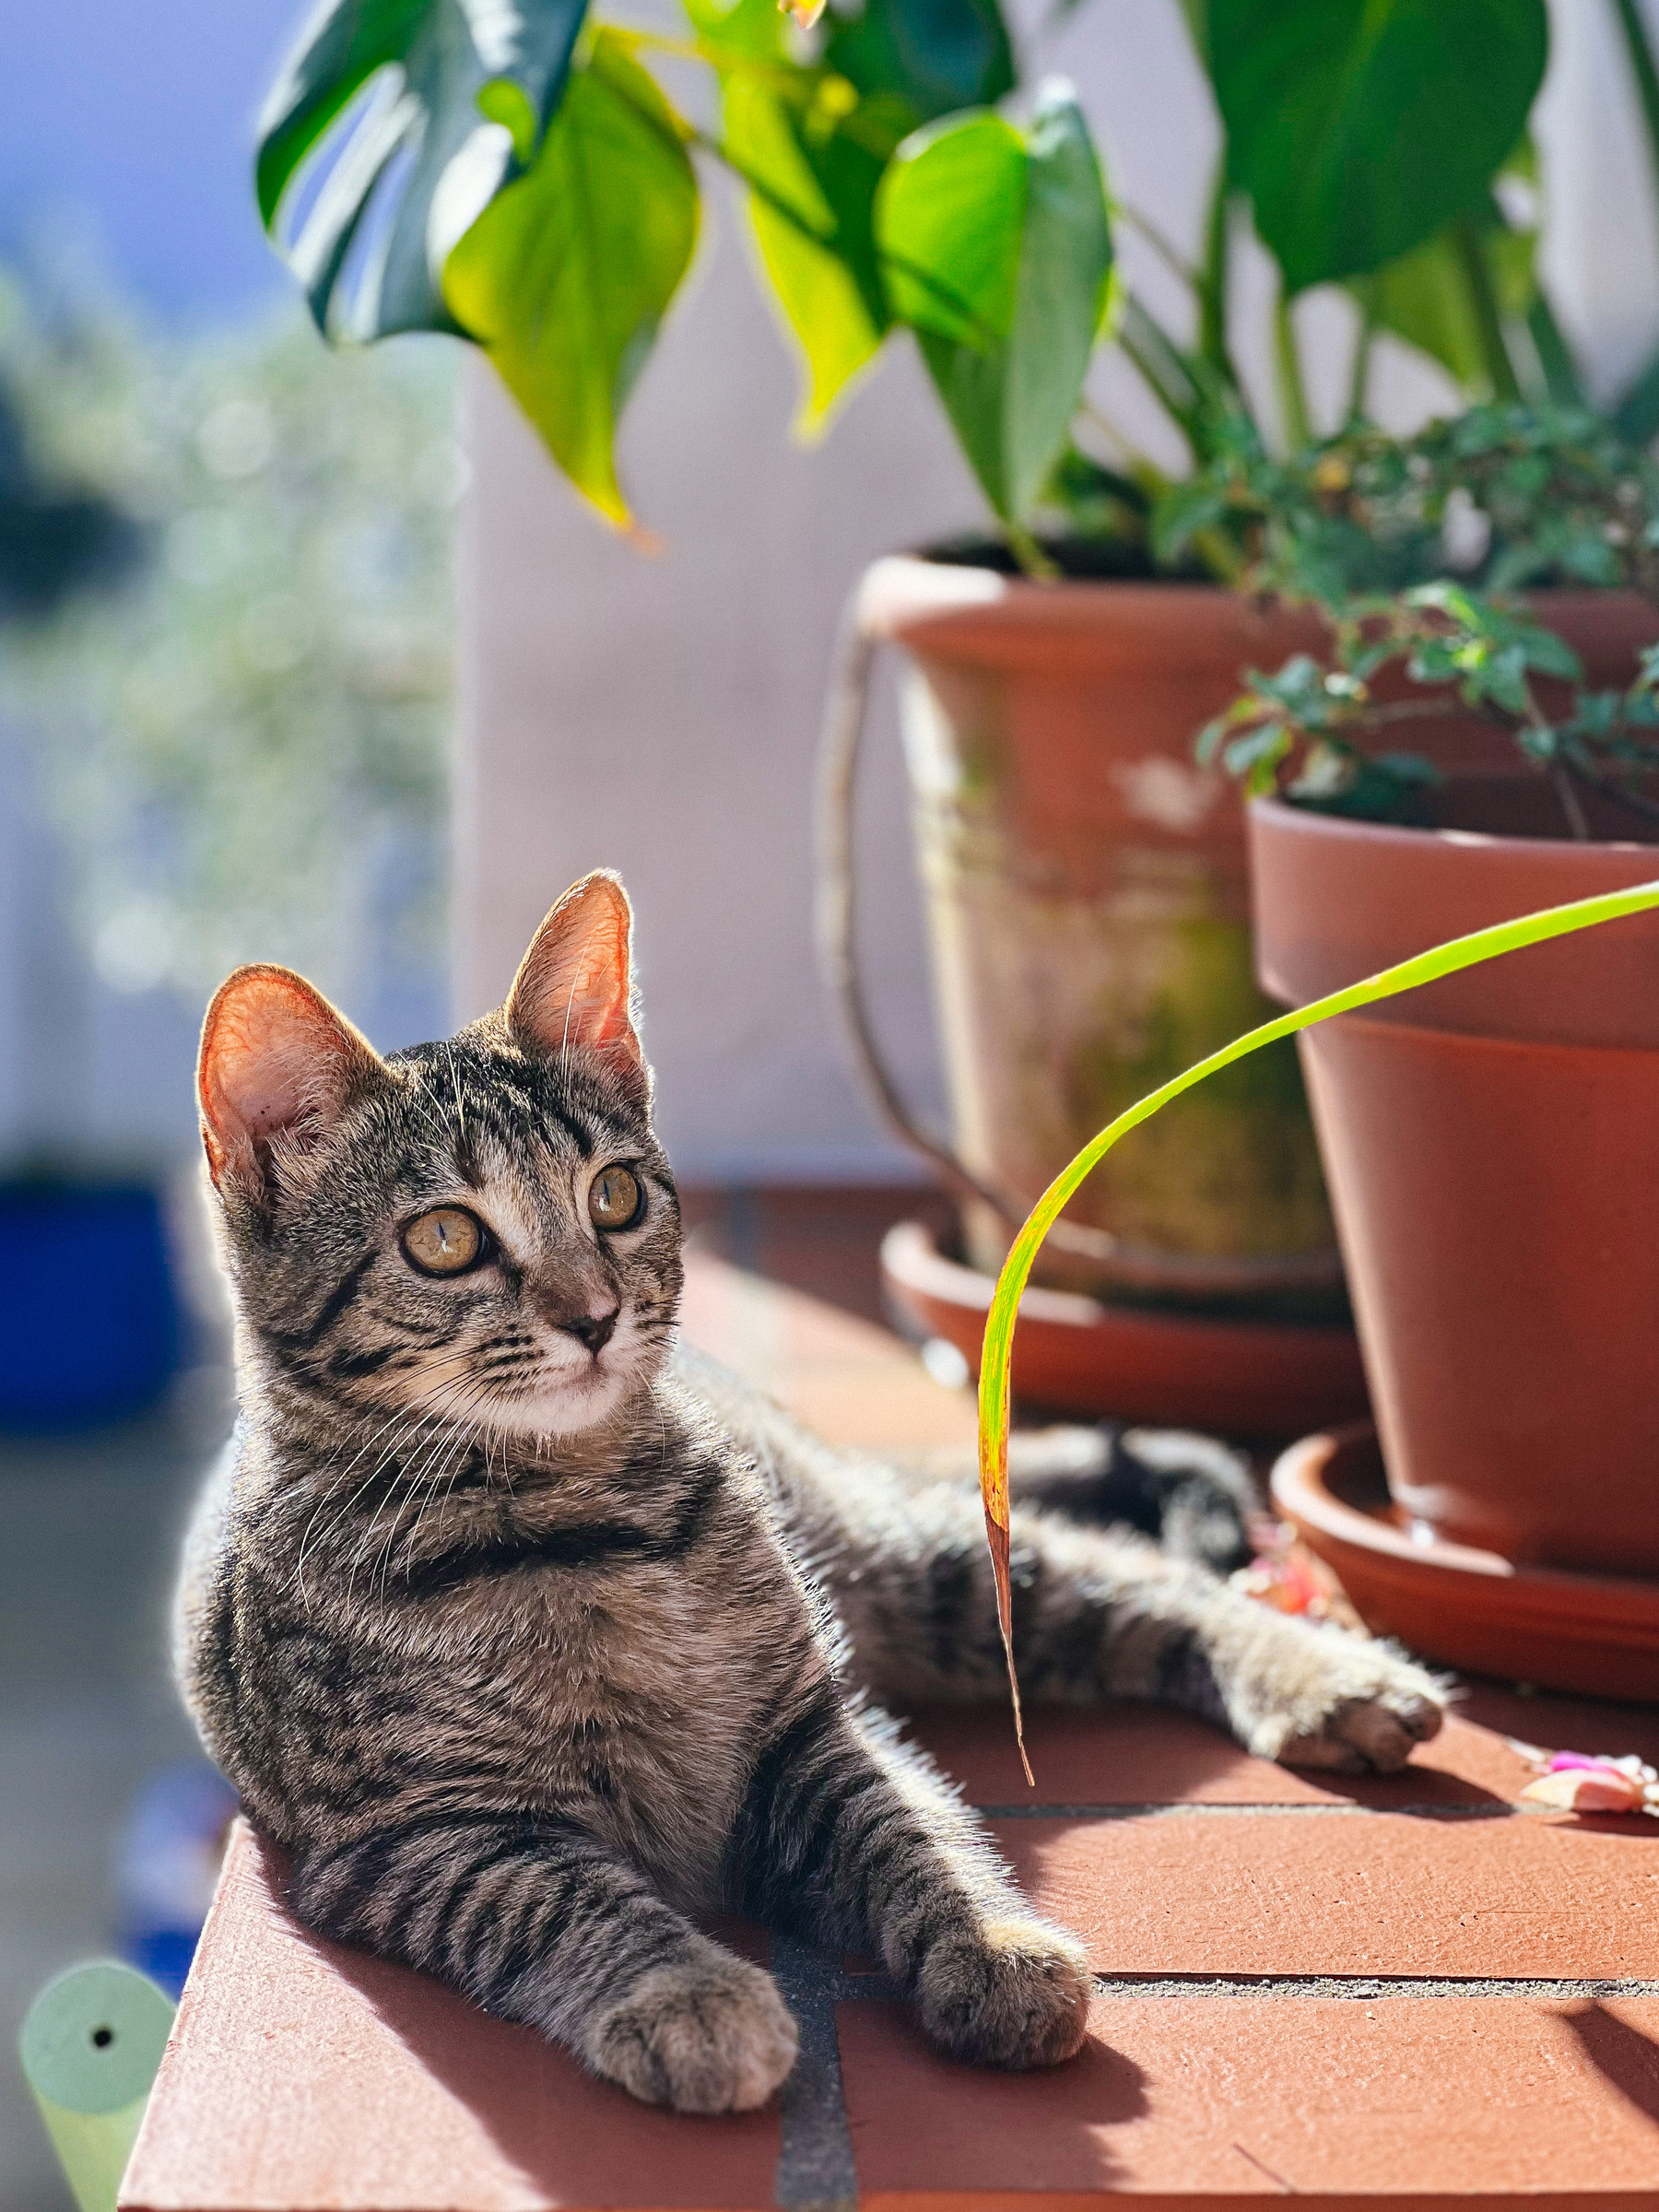 A cat sitting close to some potted plants